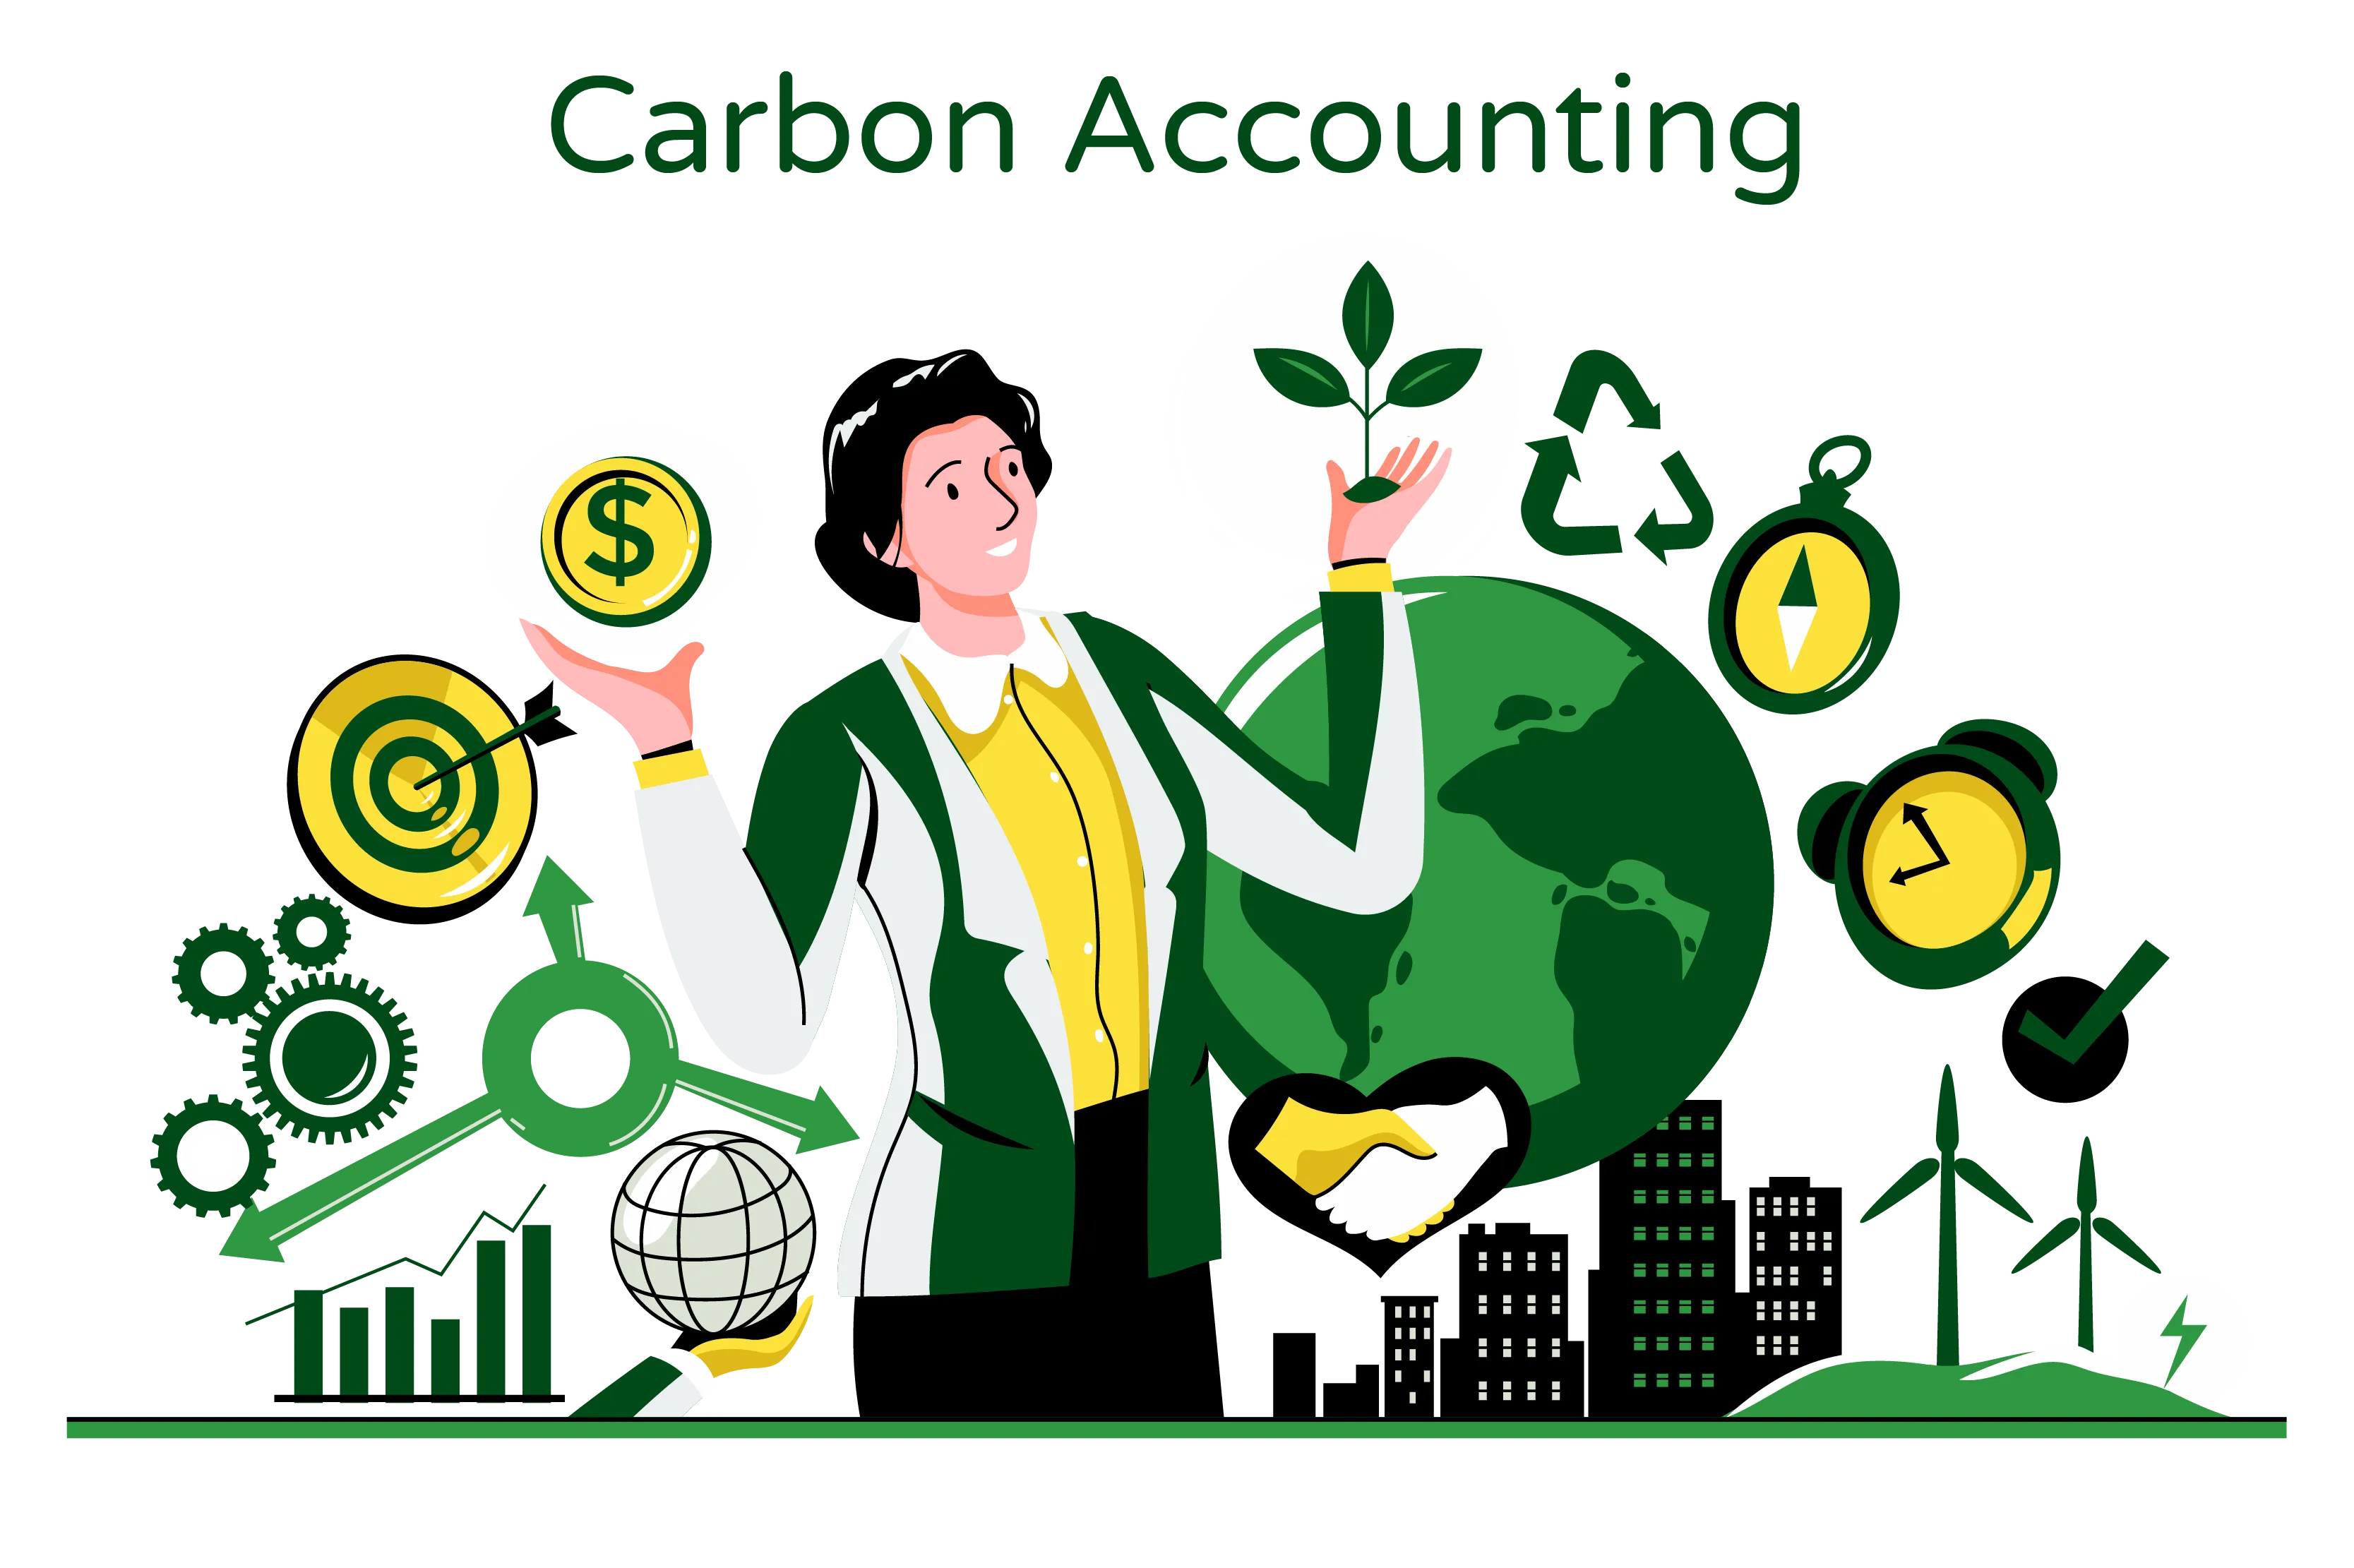 llustration titled 'Carbon Accounting' depicts a female holding a dollar in one hand and a plant in the other, with a globe in the background. The image also includes symbols representing sustainability, a clock, and turbines. On the other side, there is an economic graph. The illustration symbolizes the transformative potential of carbon accounting methods as described in the accompanying paragraph."  The illustration visually represents the concept of carbon accounting, aligning with the title and paragraph. The woman holding a dollar and a plant represents the dual focus of balancing economic considerations and environmental sustainability. The presence of a globe signifies the global impact and interconnectedness of carbon accounting efforts.  Symbols such as the sustainability sign, clock, and turbines convey the urgency of addressing the climate emergency and the need for sustainable practices. On the other side, the economic graph represents the recognition that carbon accounting goes beyond compliance—it is about integrating sustainability into responsible corporate citizenship and leading the way towards a more sustainable future.  Overall, the 'Carbon Accounting' illustration visually captures the idea presented in the paragraph by depicting the transformative potential of carbon accounting methods, highlighting the importance of understanding a business's environmental impact as intimately as its financial bottom line in the face of the climate crisis.